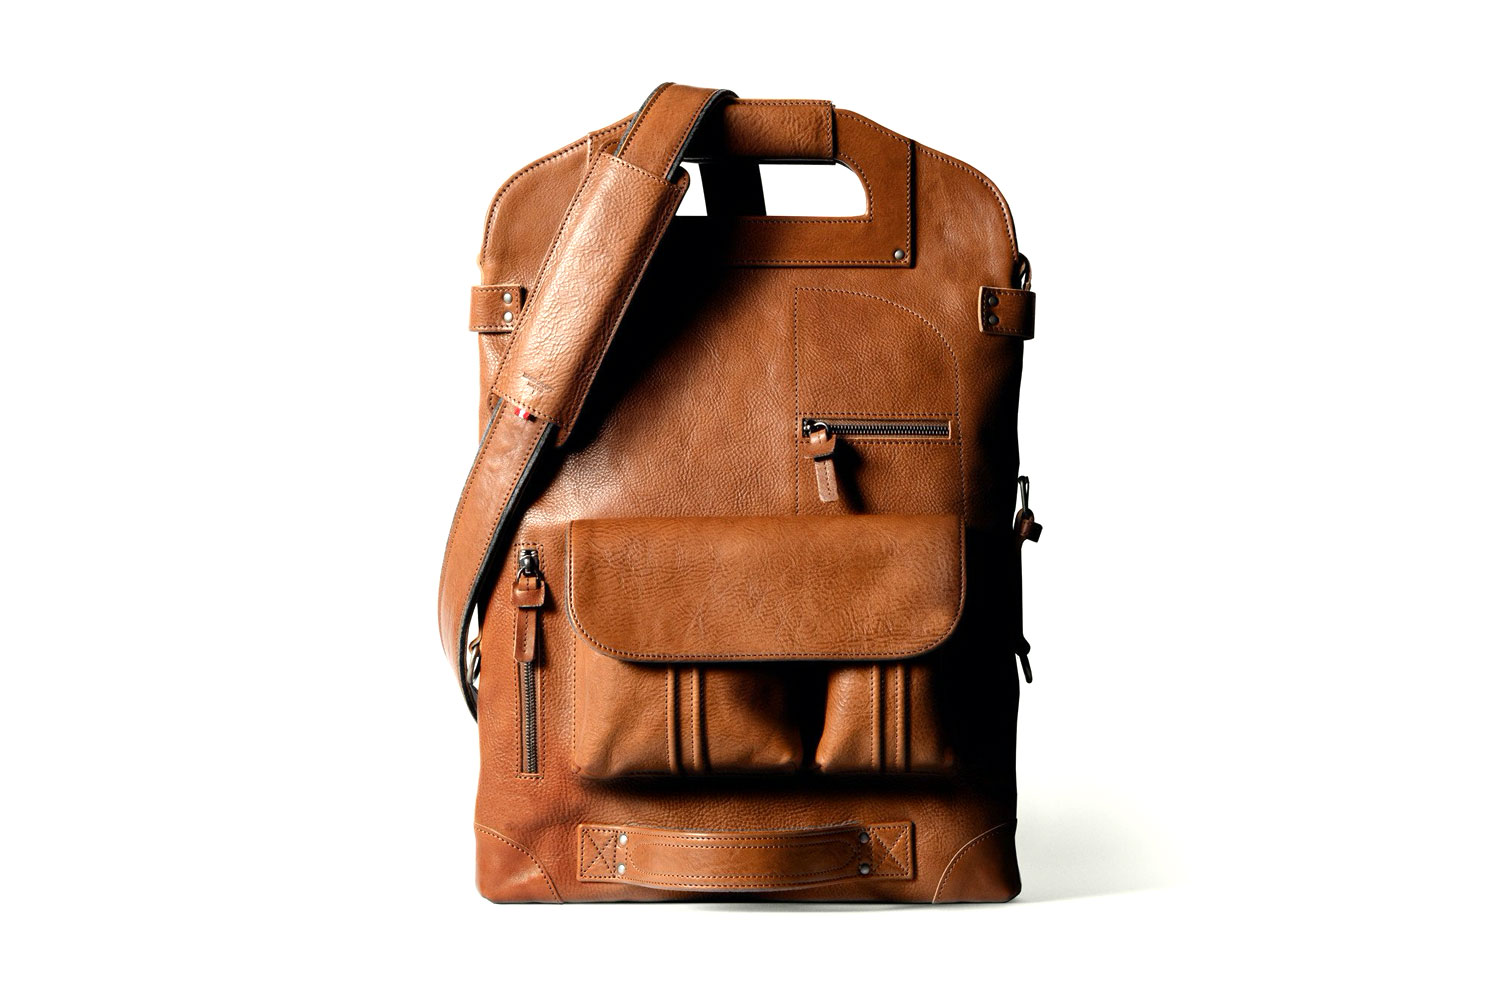 20 Best Leather Laptop Bags of 2022